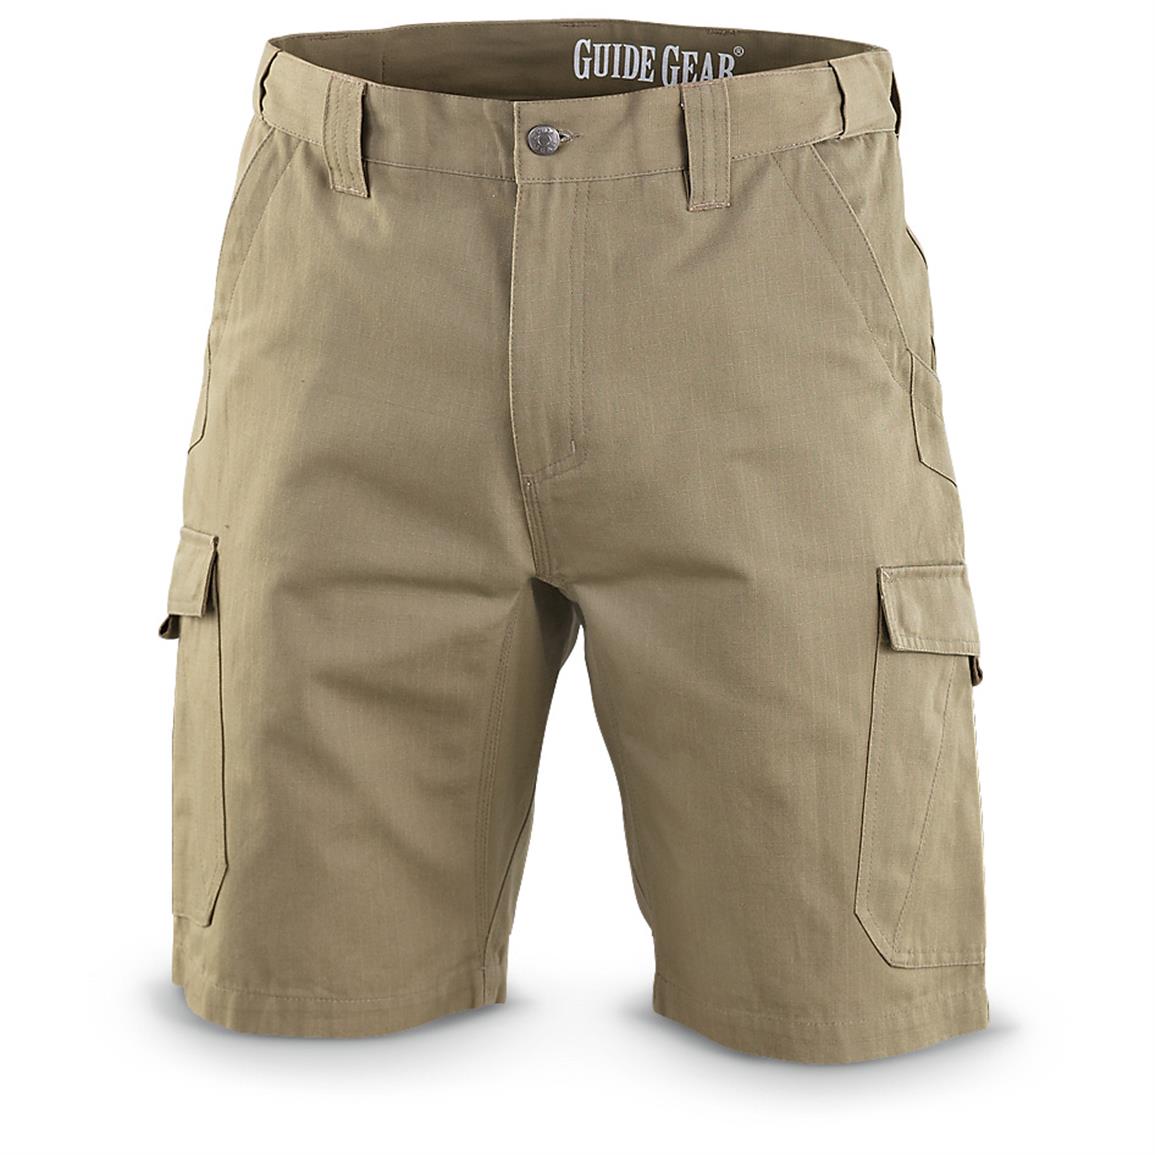 Guide Gear Ripstop Cargo Work Shorts - 581151, Shorts at Sportsman's Guide